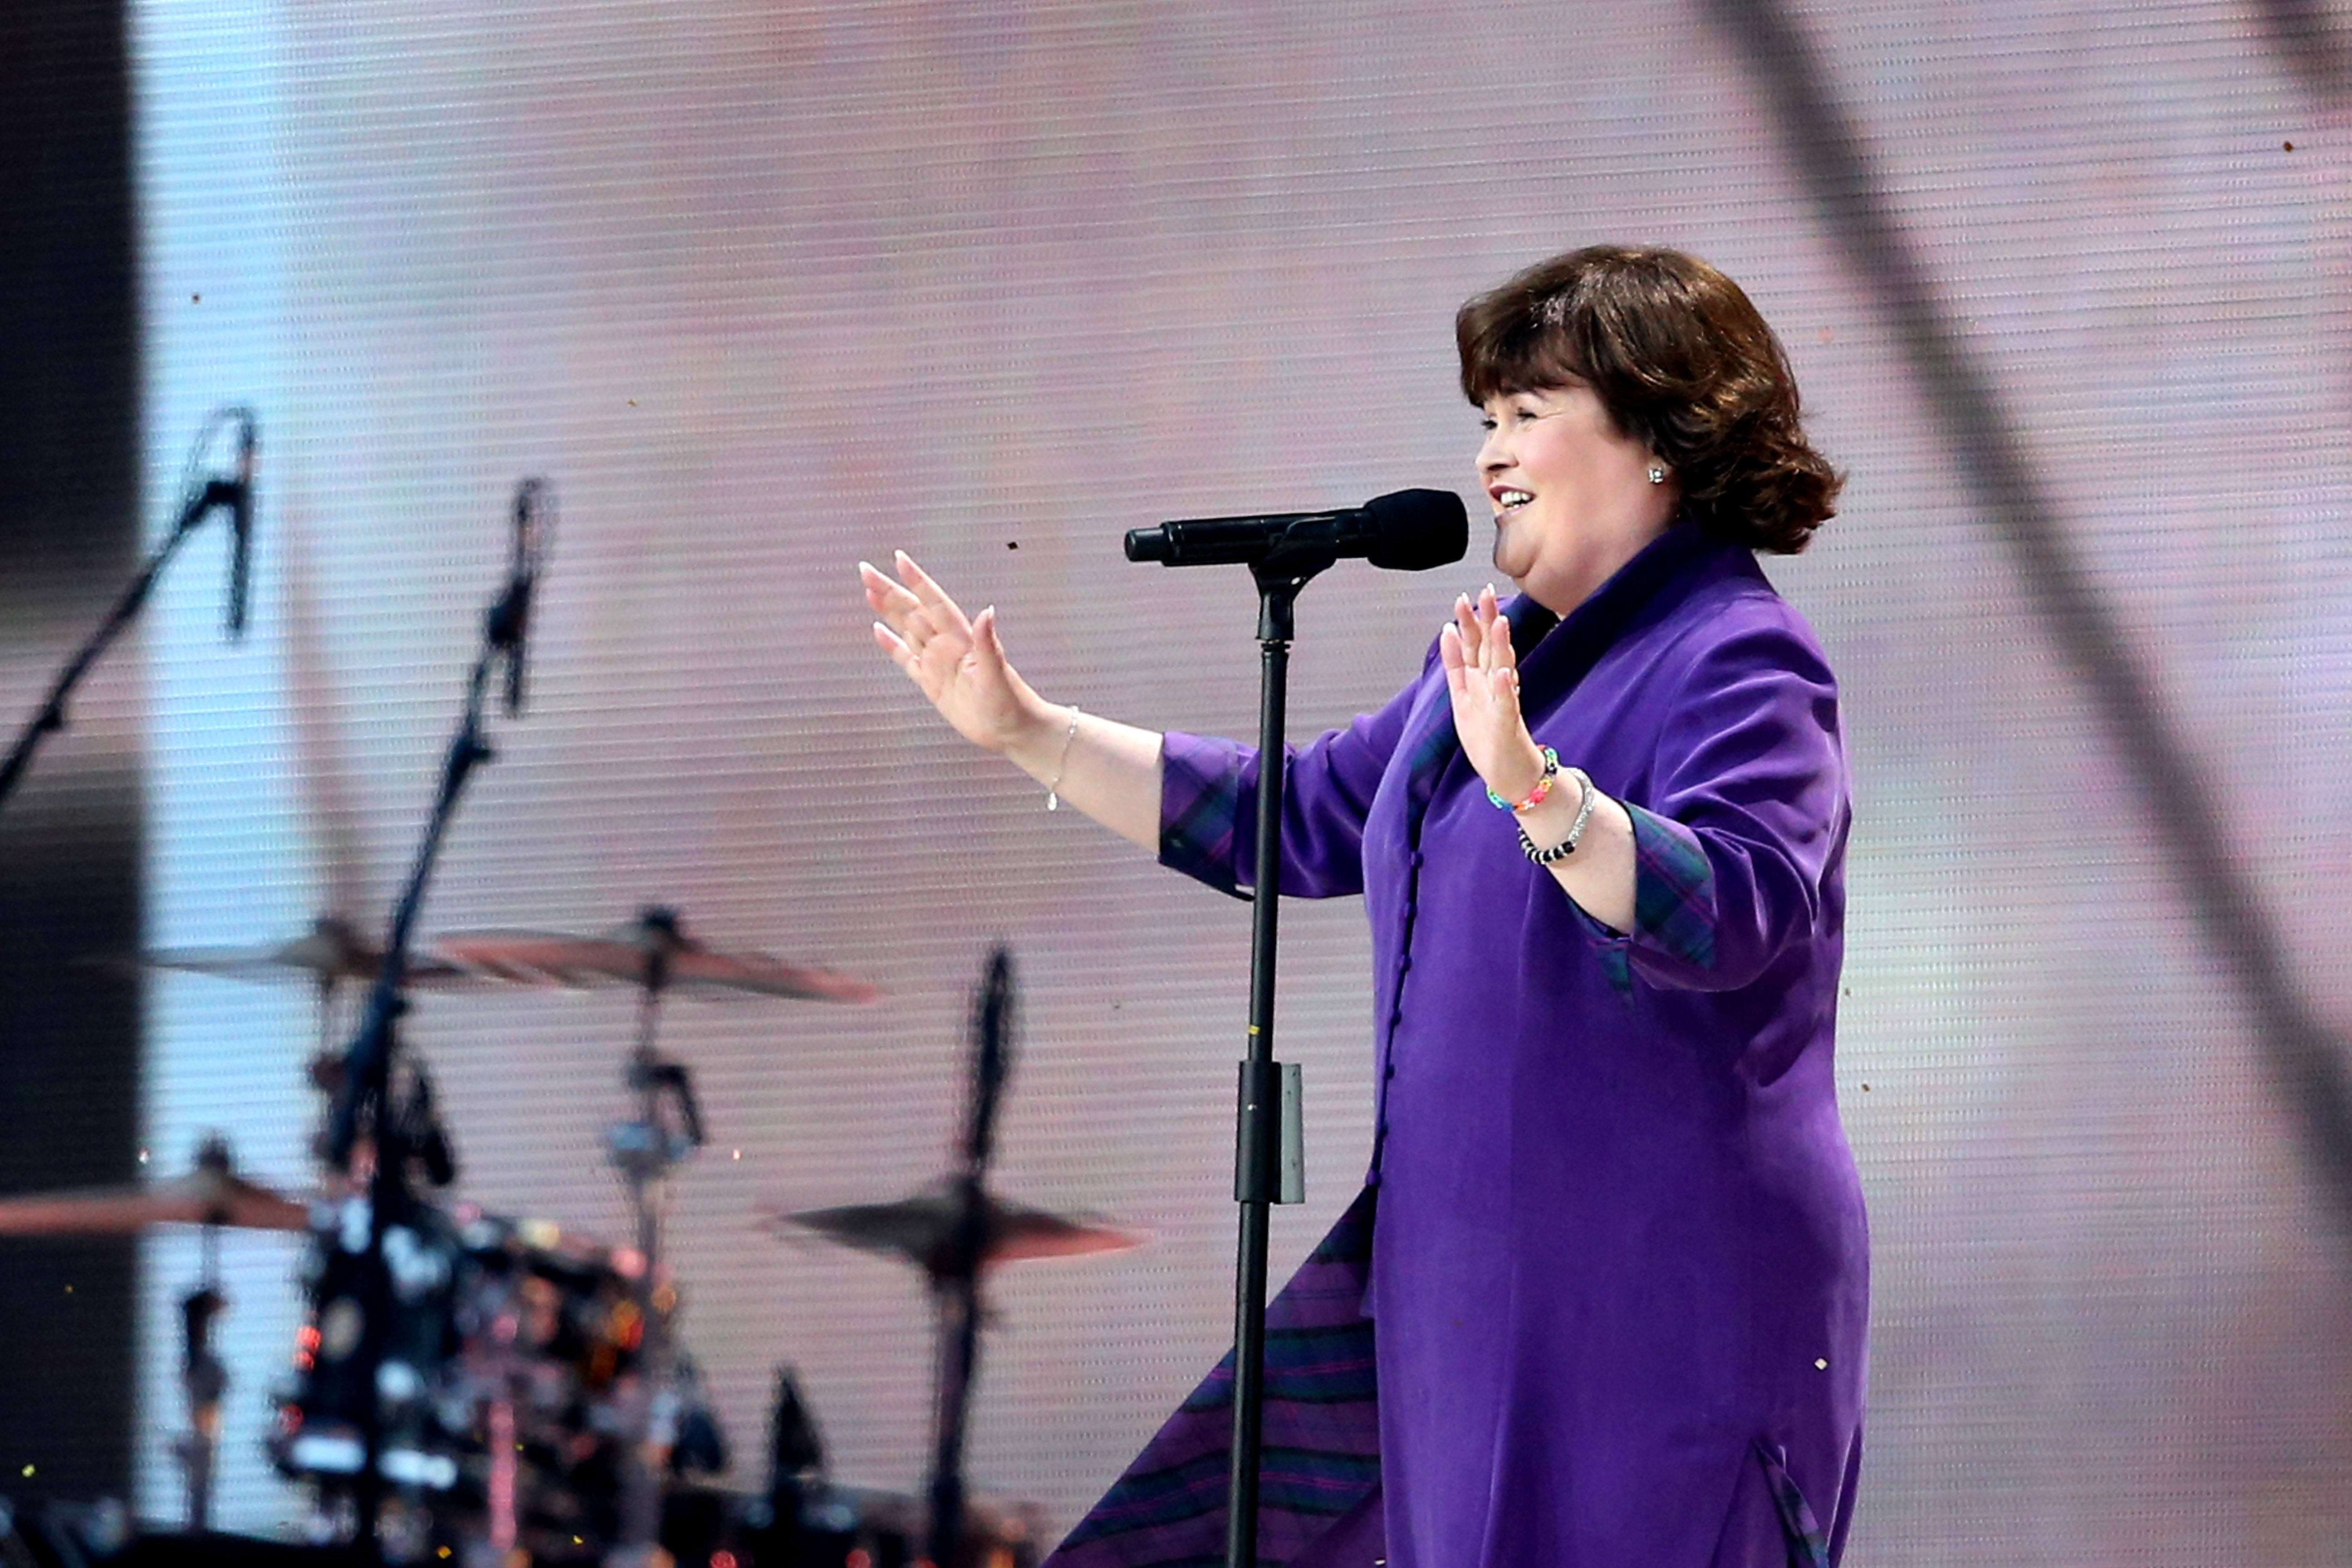 Susan Boyle performs during the opening ceremony for the Glasgow 2014 Commonwealth Games on July 23, 2014 in Glasgow, Scotland | Source: Getty Images